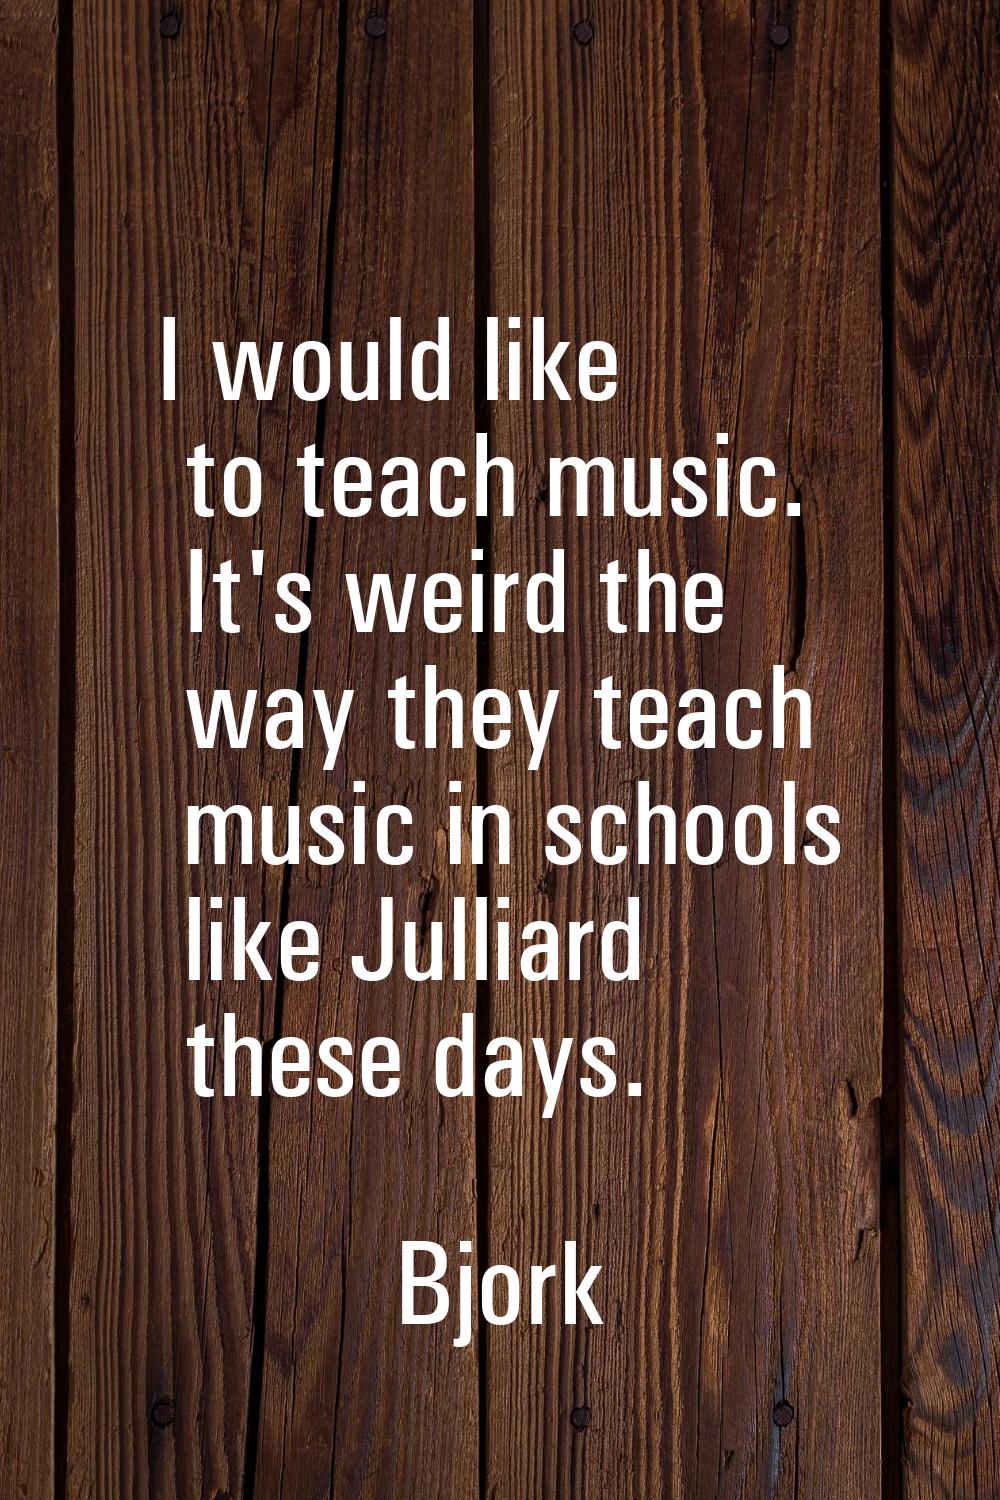 I would like to teach music. It's weird the way they teach music in schools like Julliard these day